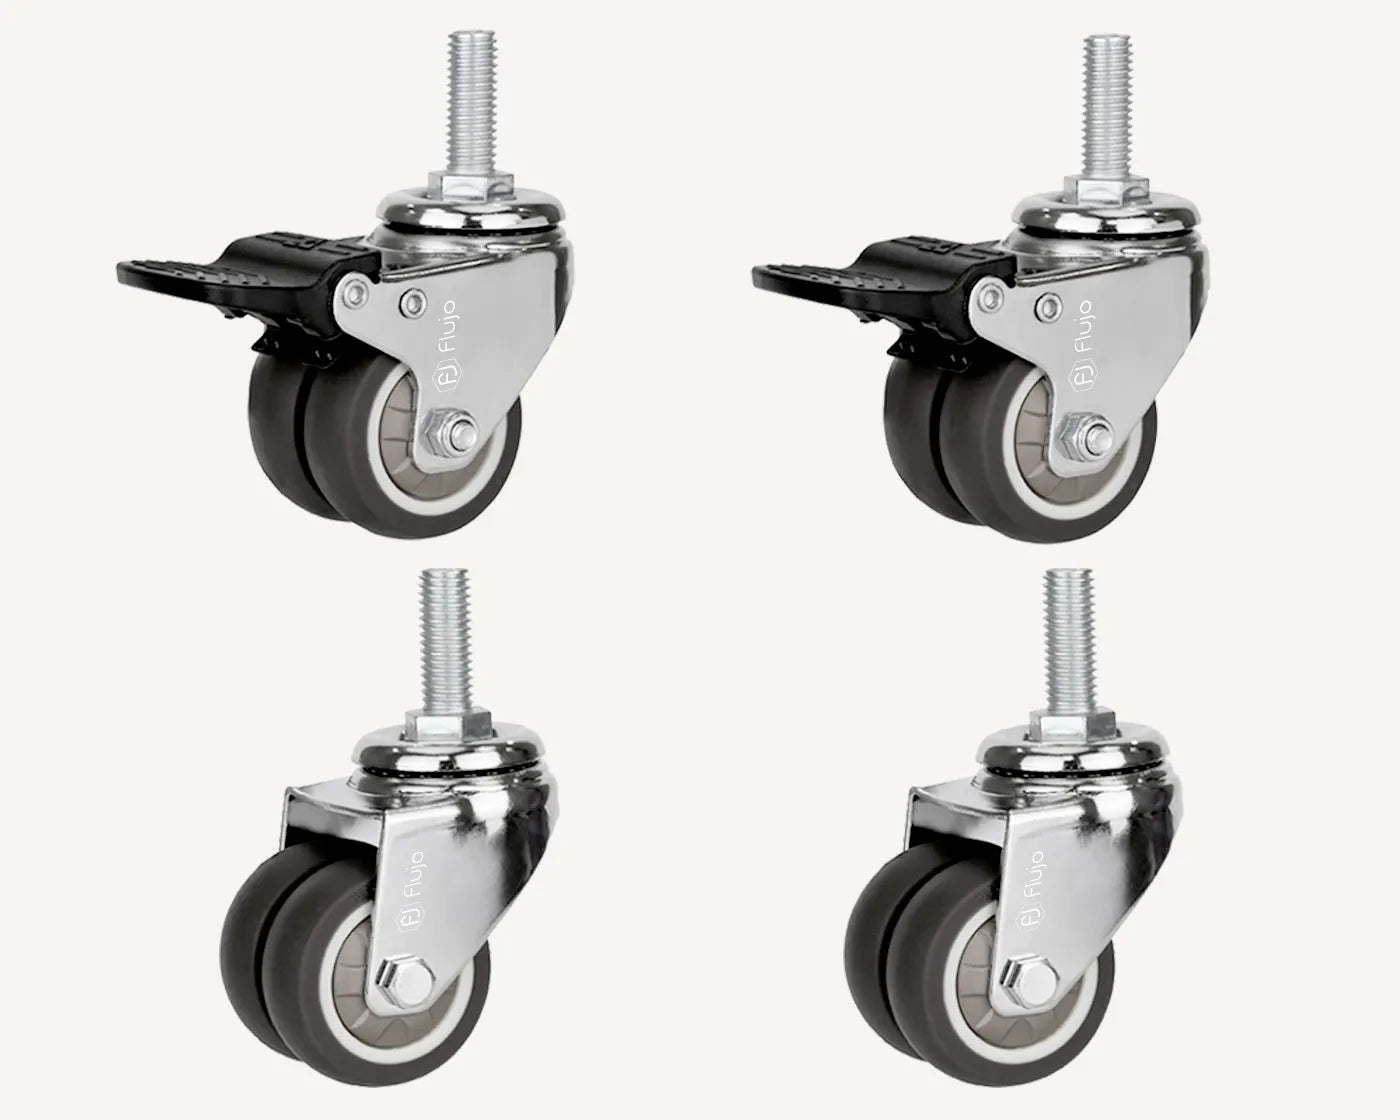 A set of four heavy-duty caster wheels with locking mechanisms, ready to be attached for enhanced maneuverability.